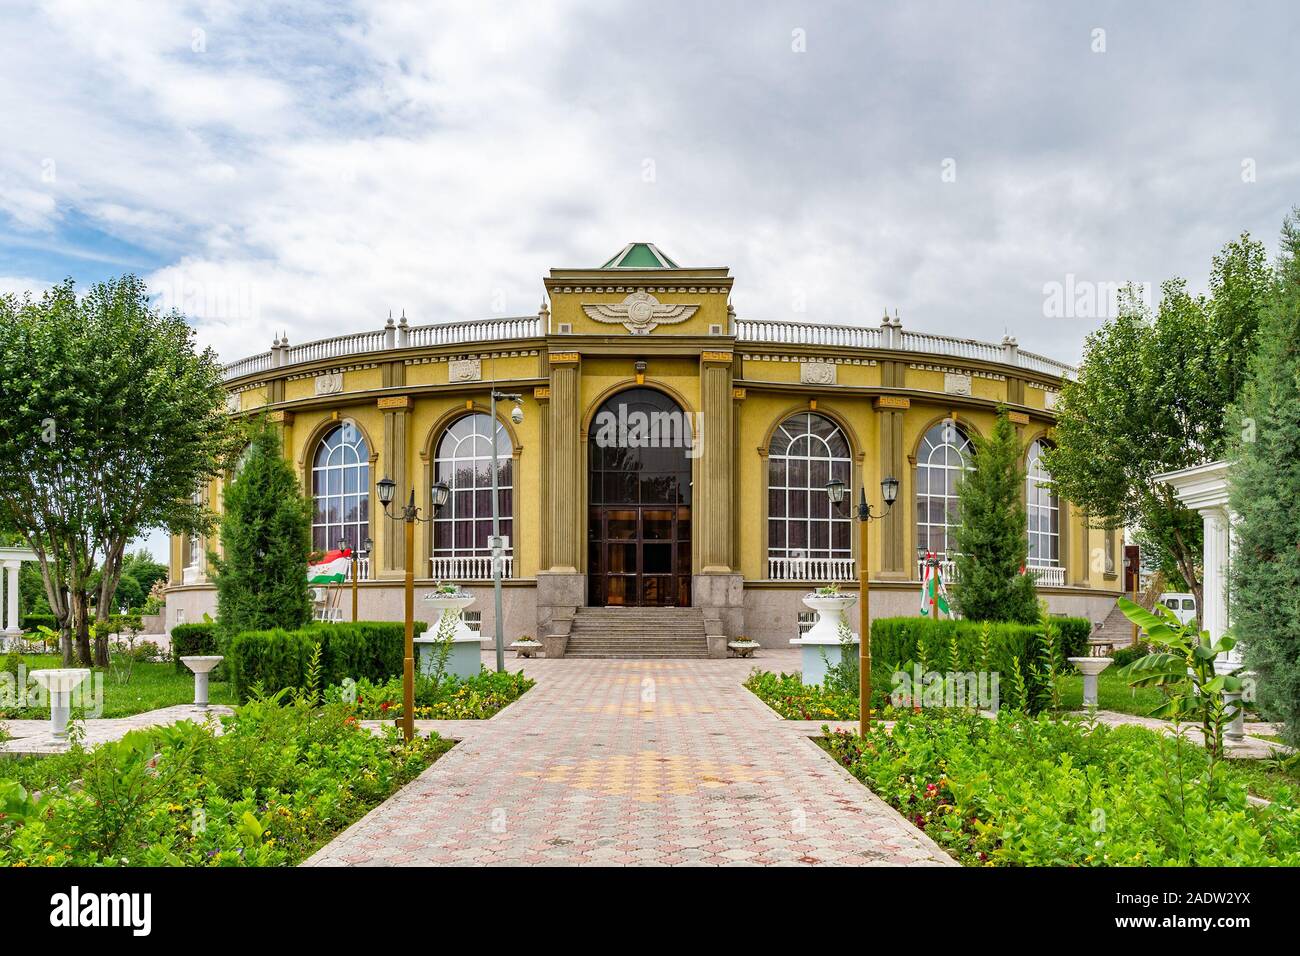 Dushanbe Amphitheater Park Picturesque View at Ismoil Somoni Avenue on a Cloudy Rainy Sky Day Stock Photo